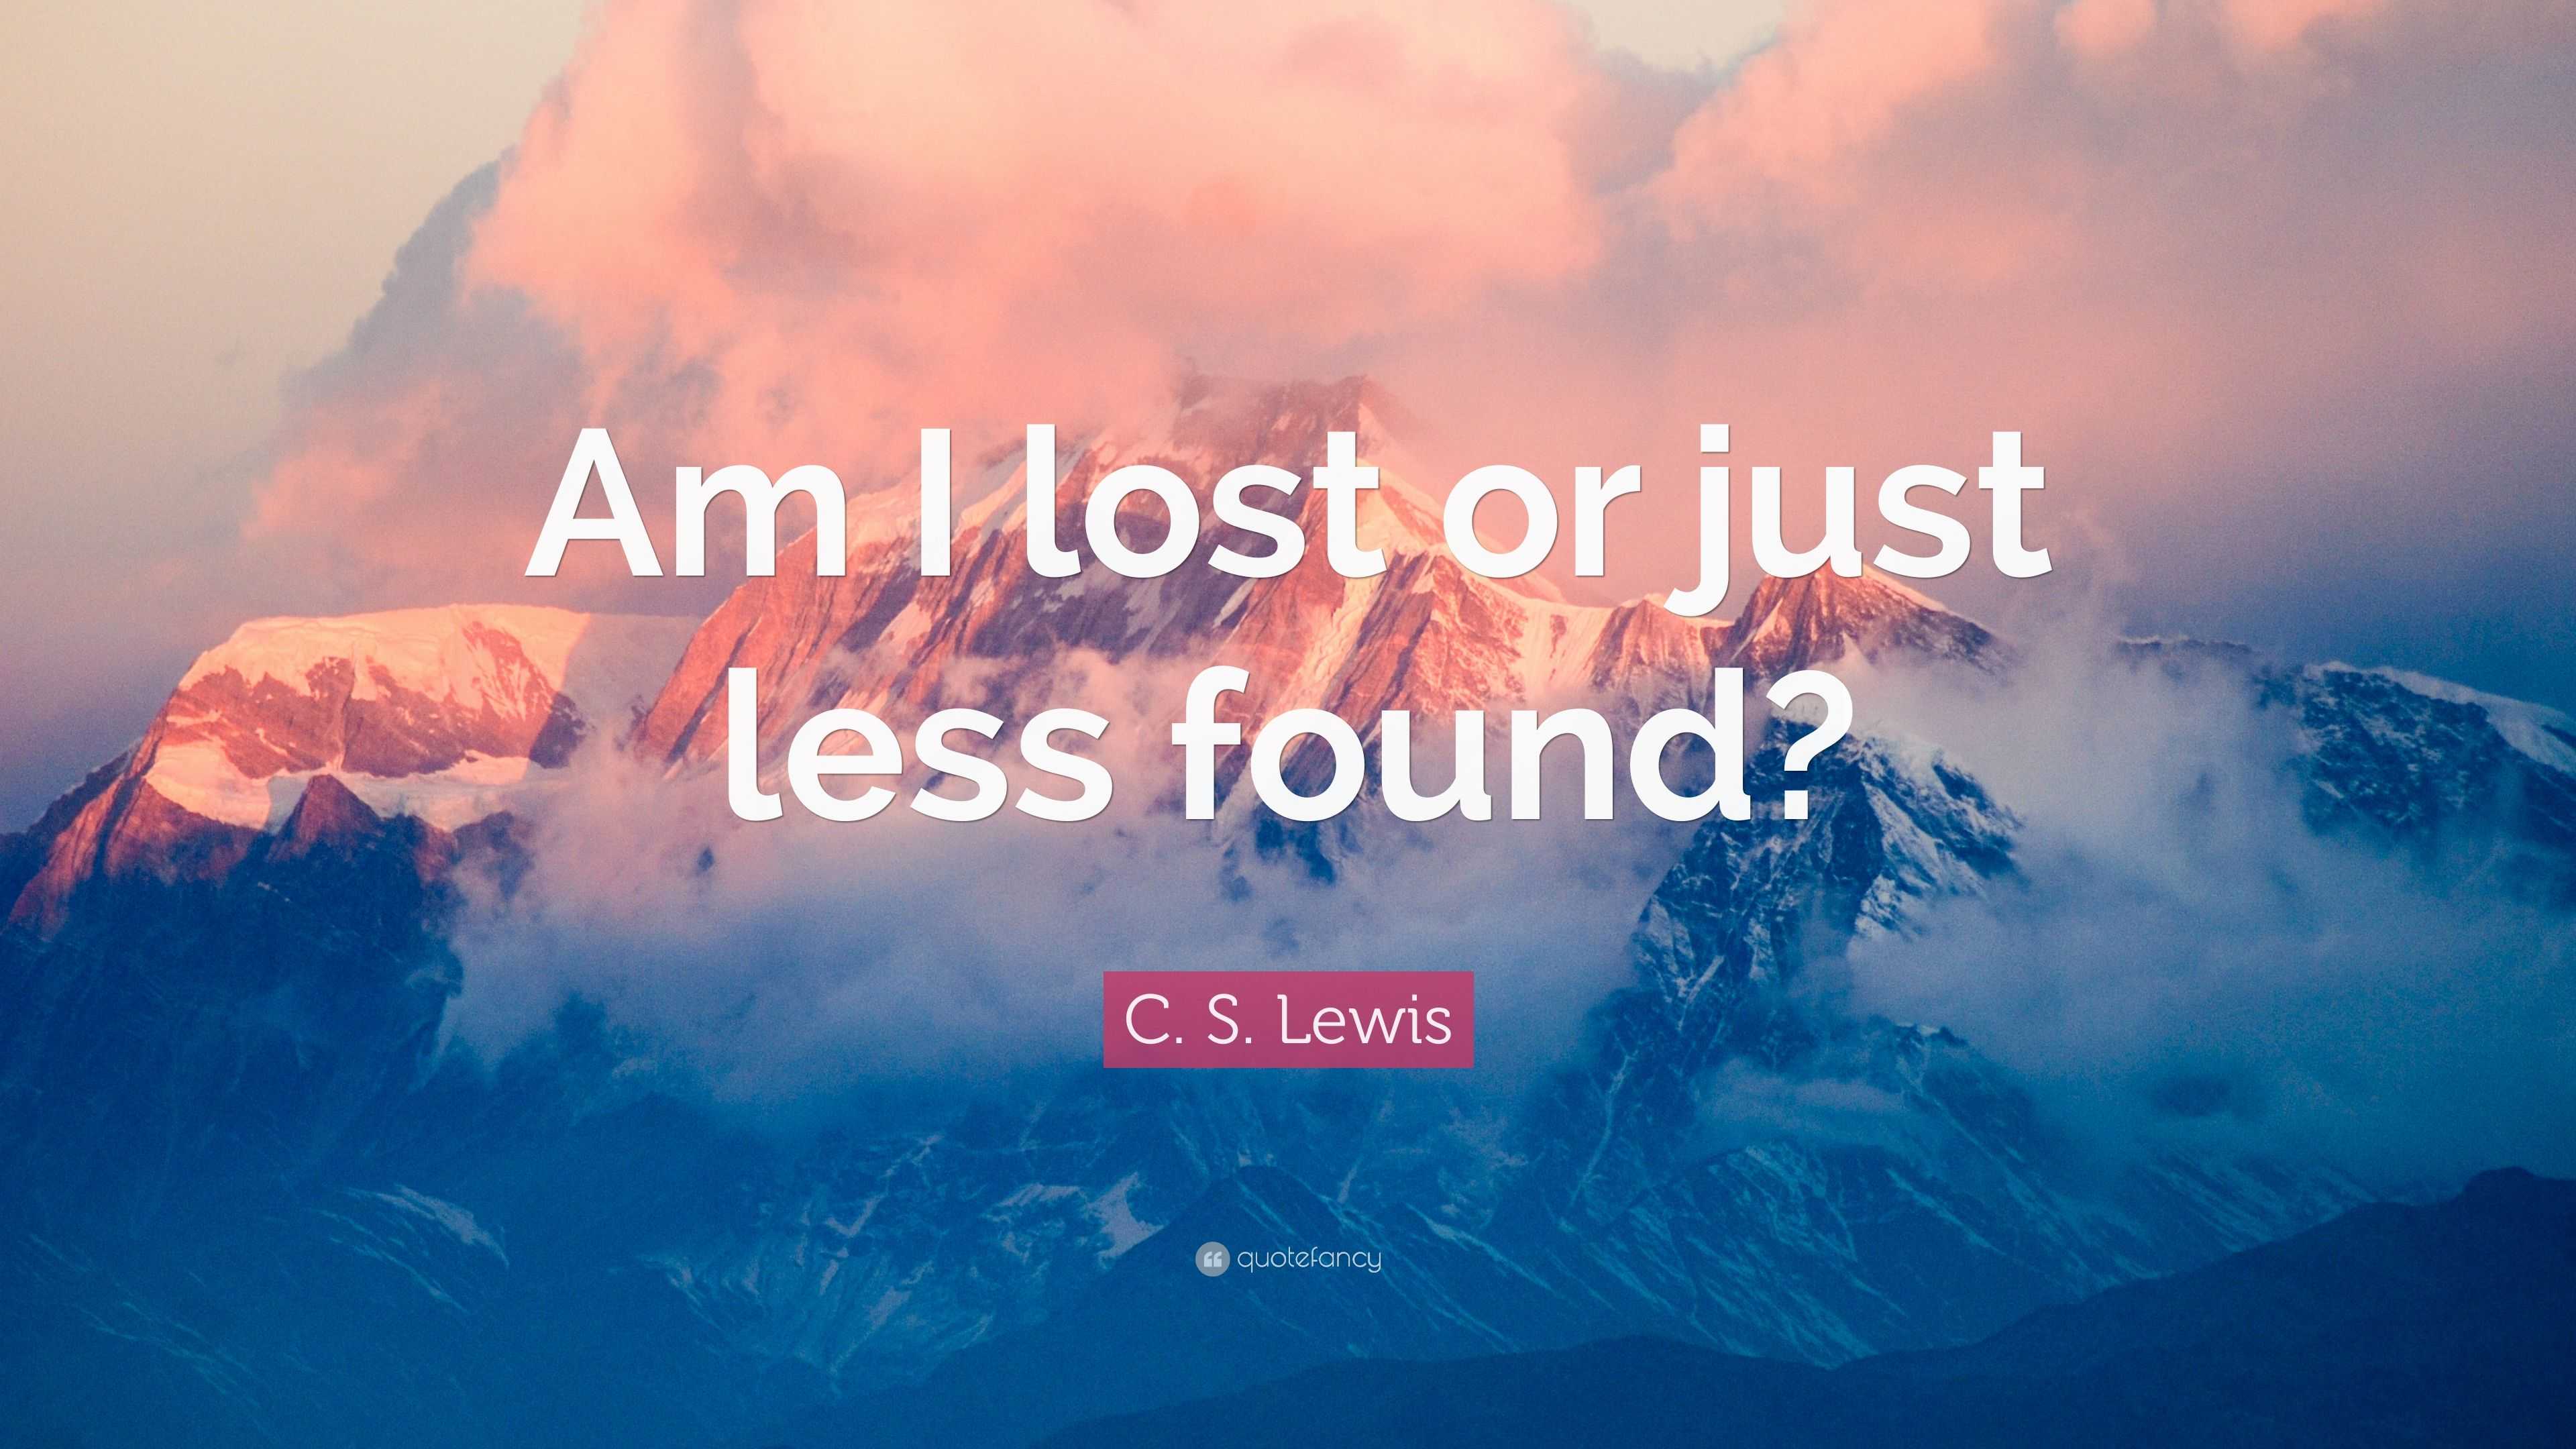 C. S. Lewis Quote: “Am I lost or just less found?”